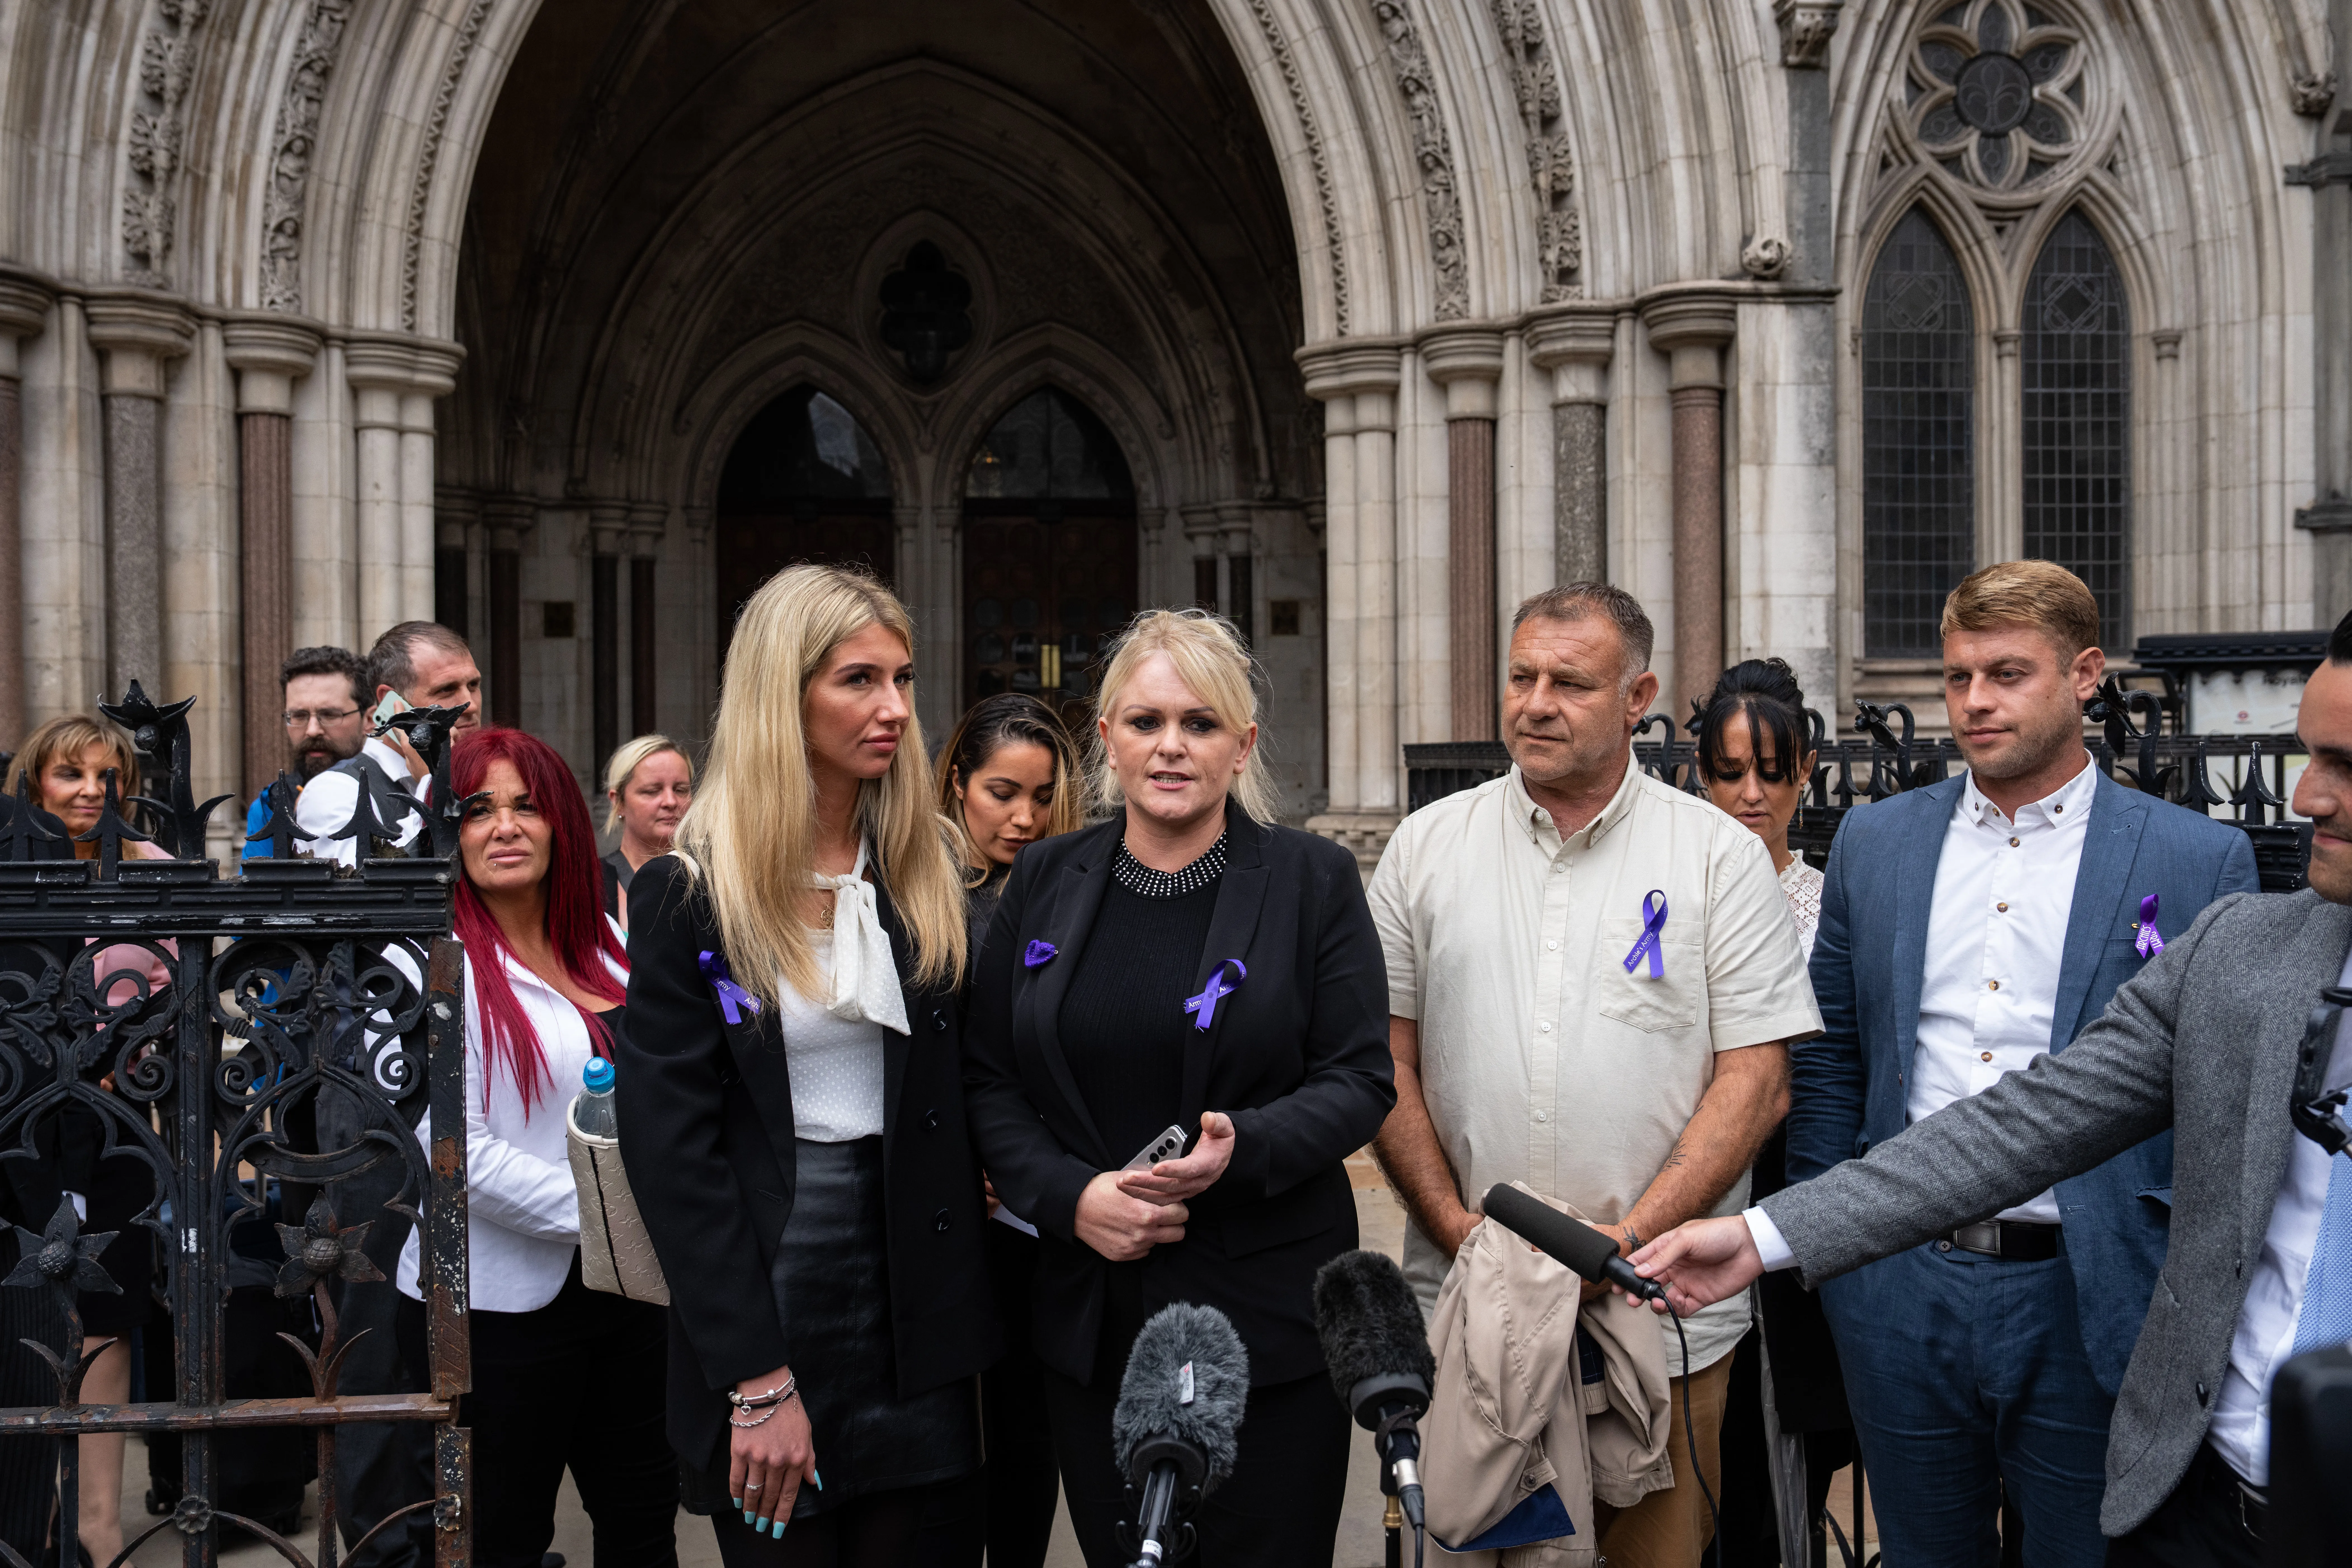 Hollie Dance (center left) and Paul Battersbee (center right)), the mother and father of Archie Battersbee, speak to the media as they leave the Royal Courts of Justice on June 29, 2022 in London, England. Archie's parents ultimately lost their legal fight to keep their son on life support. He died on Aug. 6, 2022.?w=200&h=150